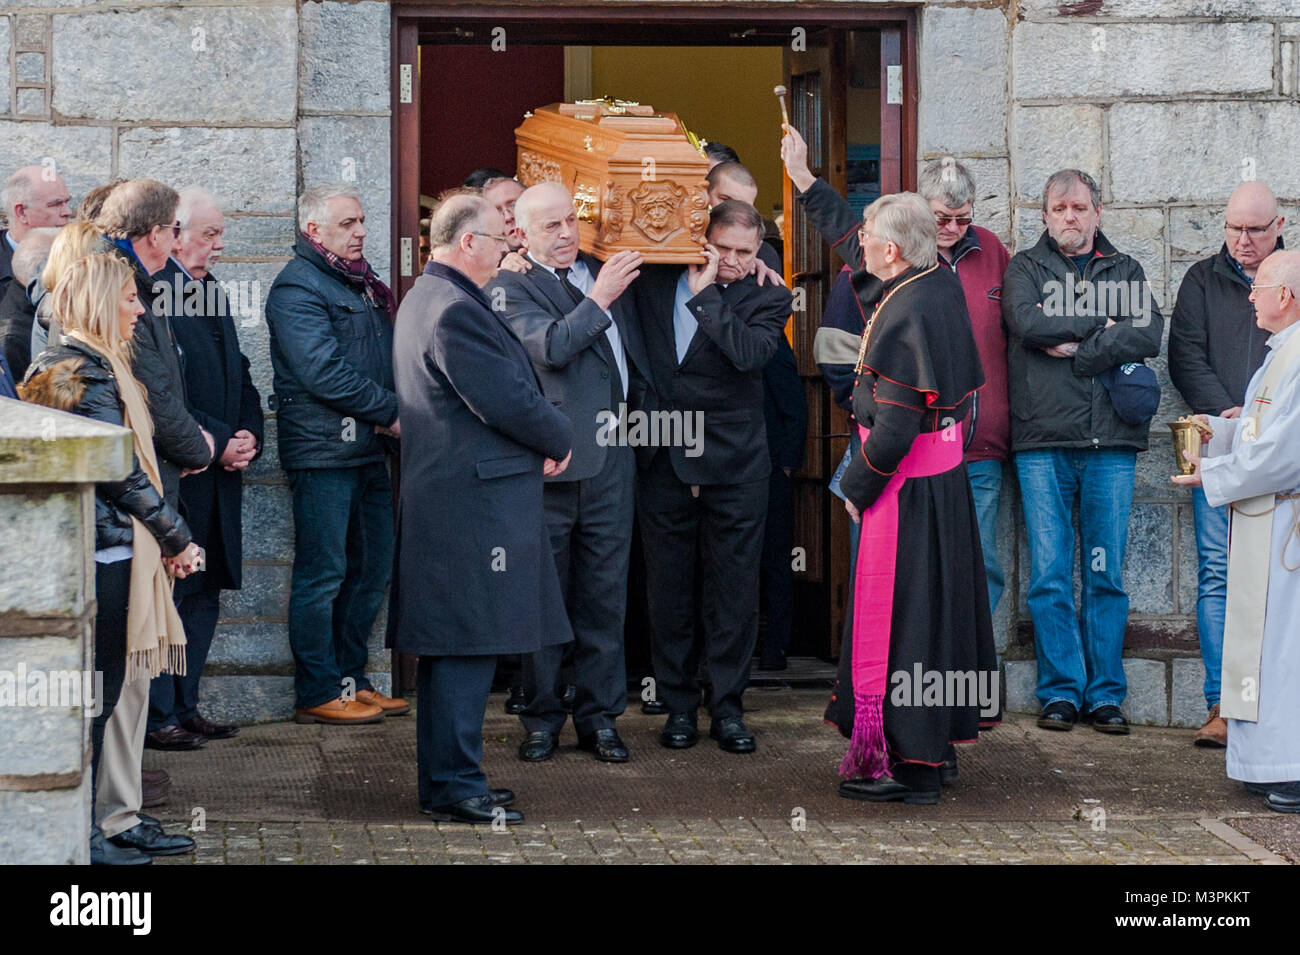 Ovens, Ireland. 12th Feb, 2018. The funeral of footballer Liam Miller took place today at St. John the Baptist Church, Ovens, County Cork, Ireland. A huge number of mourners attended the funeral, including many footballers and managers from Miller's old clubs, including Cork City, Celtic and Manchester United. Bishop John Buckley sprinkles Holy Water over Liam Miller's coffin after the funeral. Credit: Andy Gibson/Alamy Live News. Stock Photo